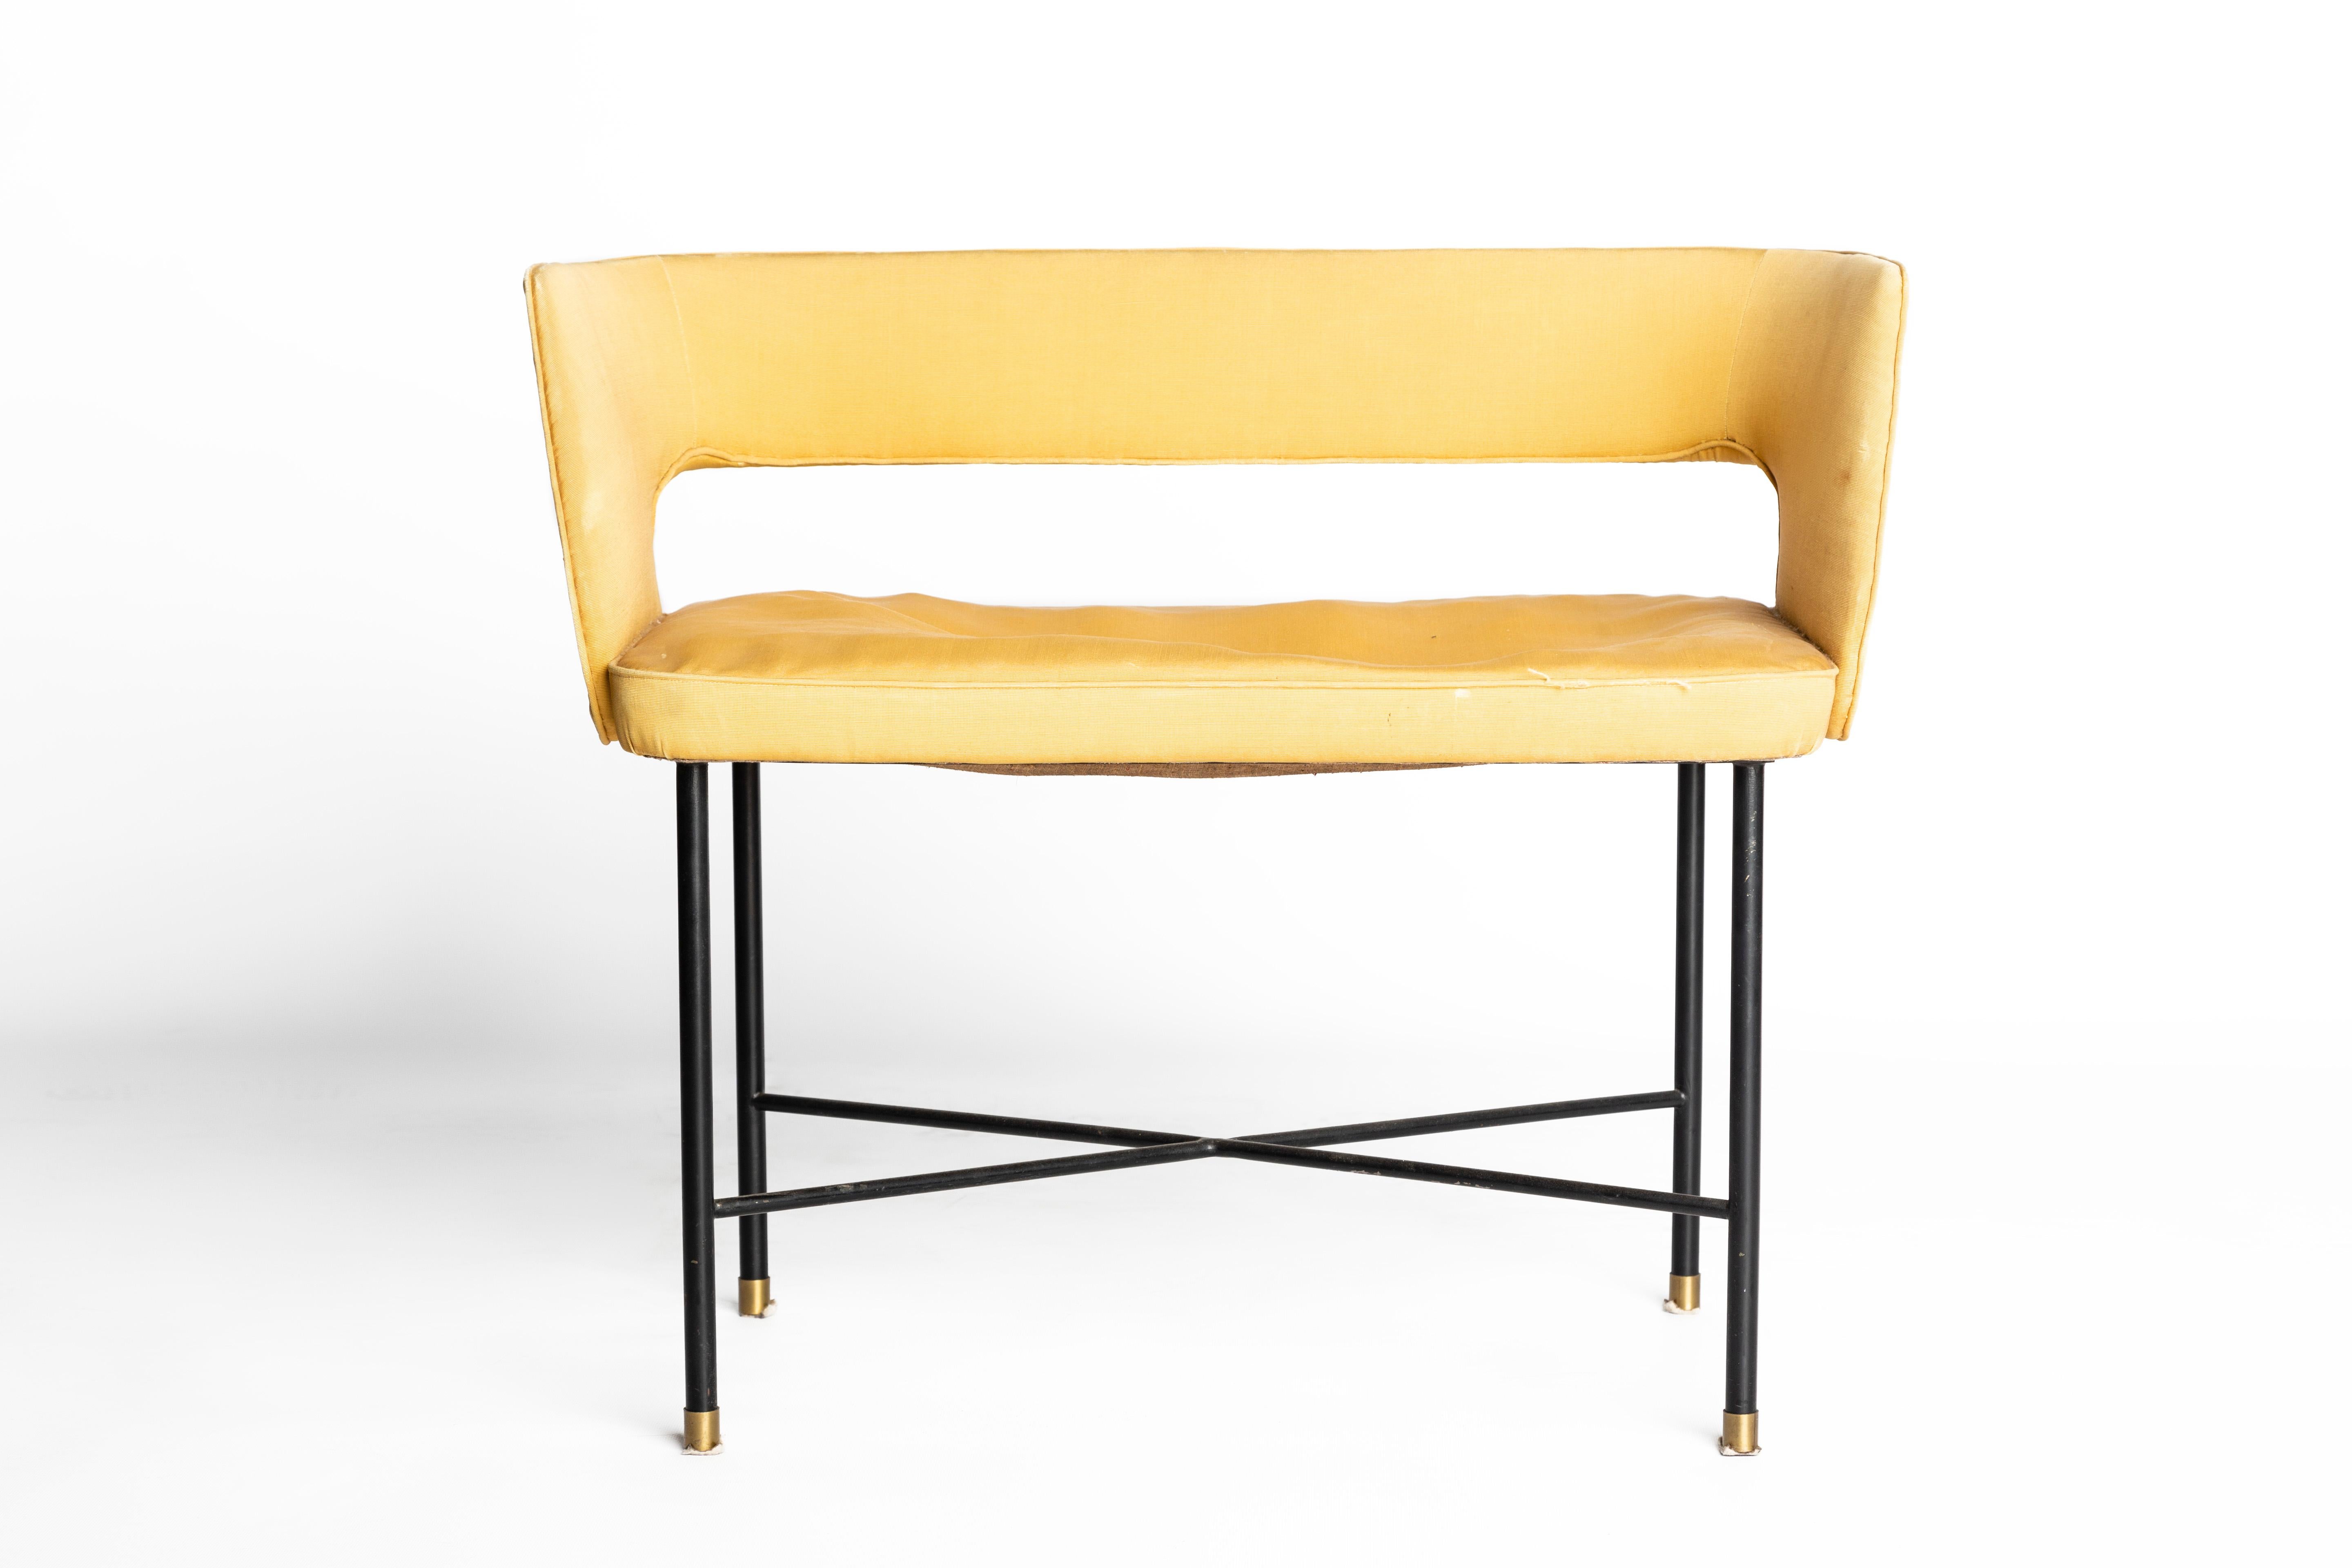 Pair of seats designed by Gigi Radice and Enrico Meroni.
Structure in varnished metal astragal, fabric-coated padding, ends in brass.
Realized in Italy, 1950s.
Good conditions.